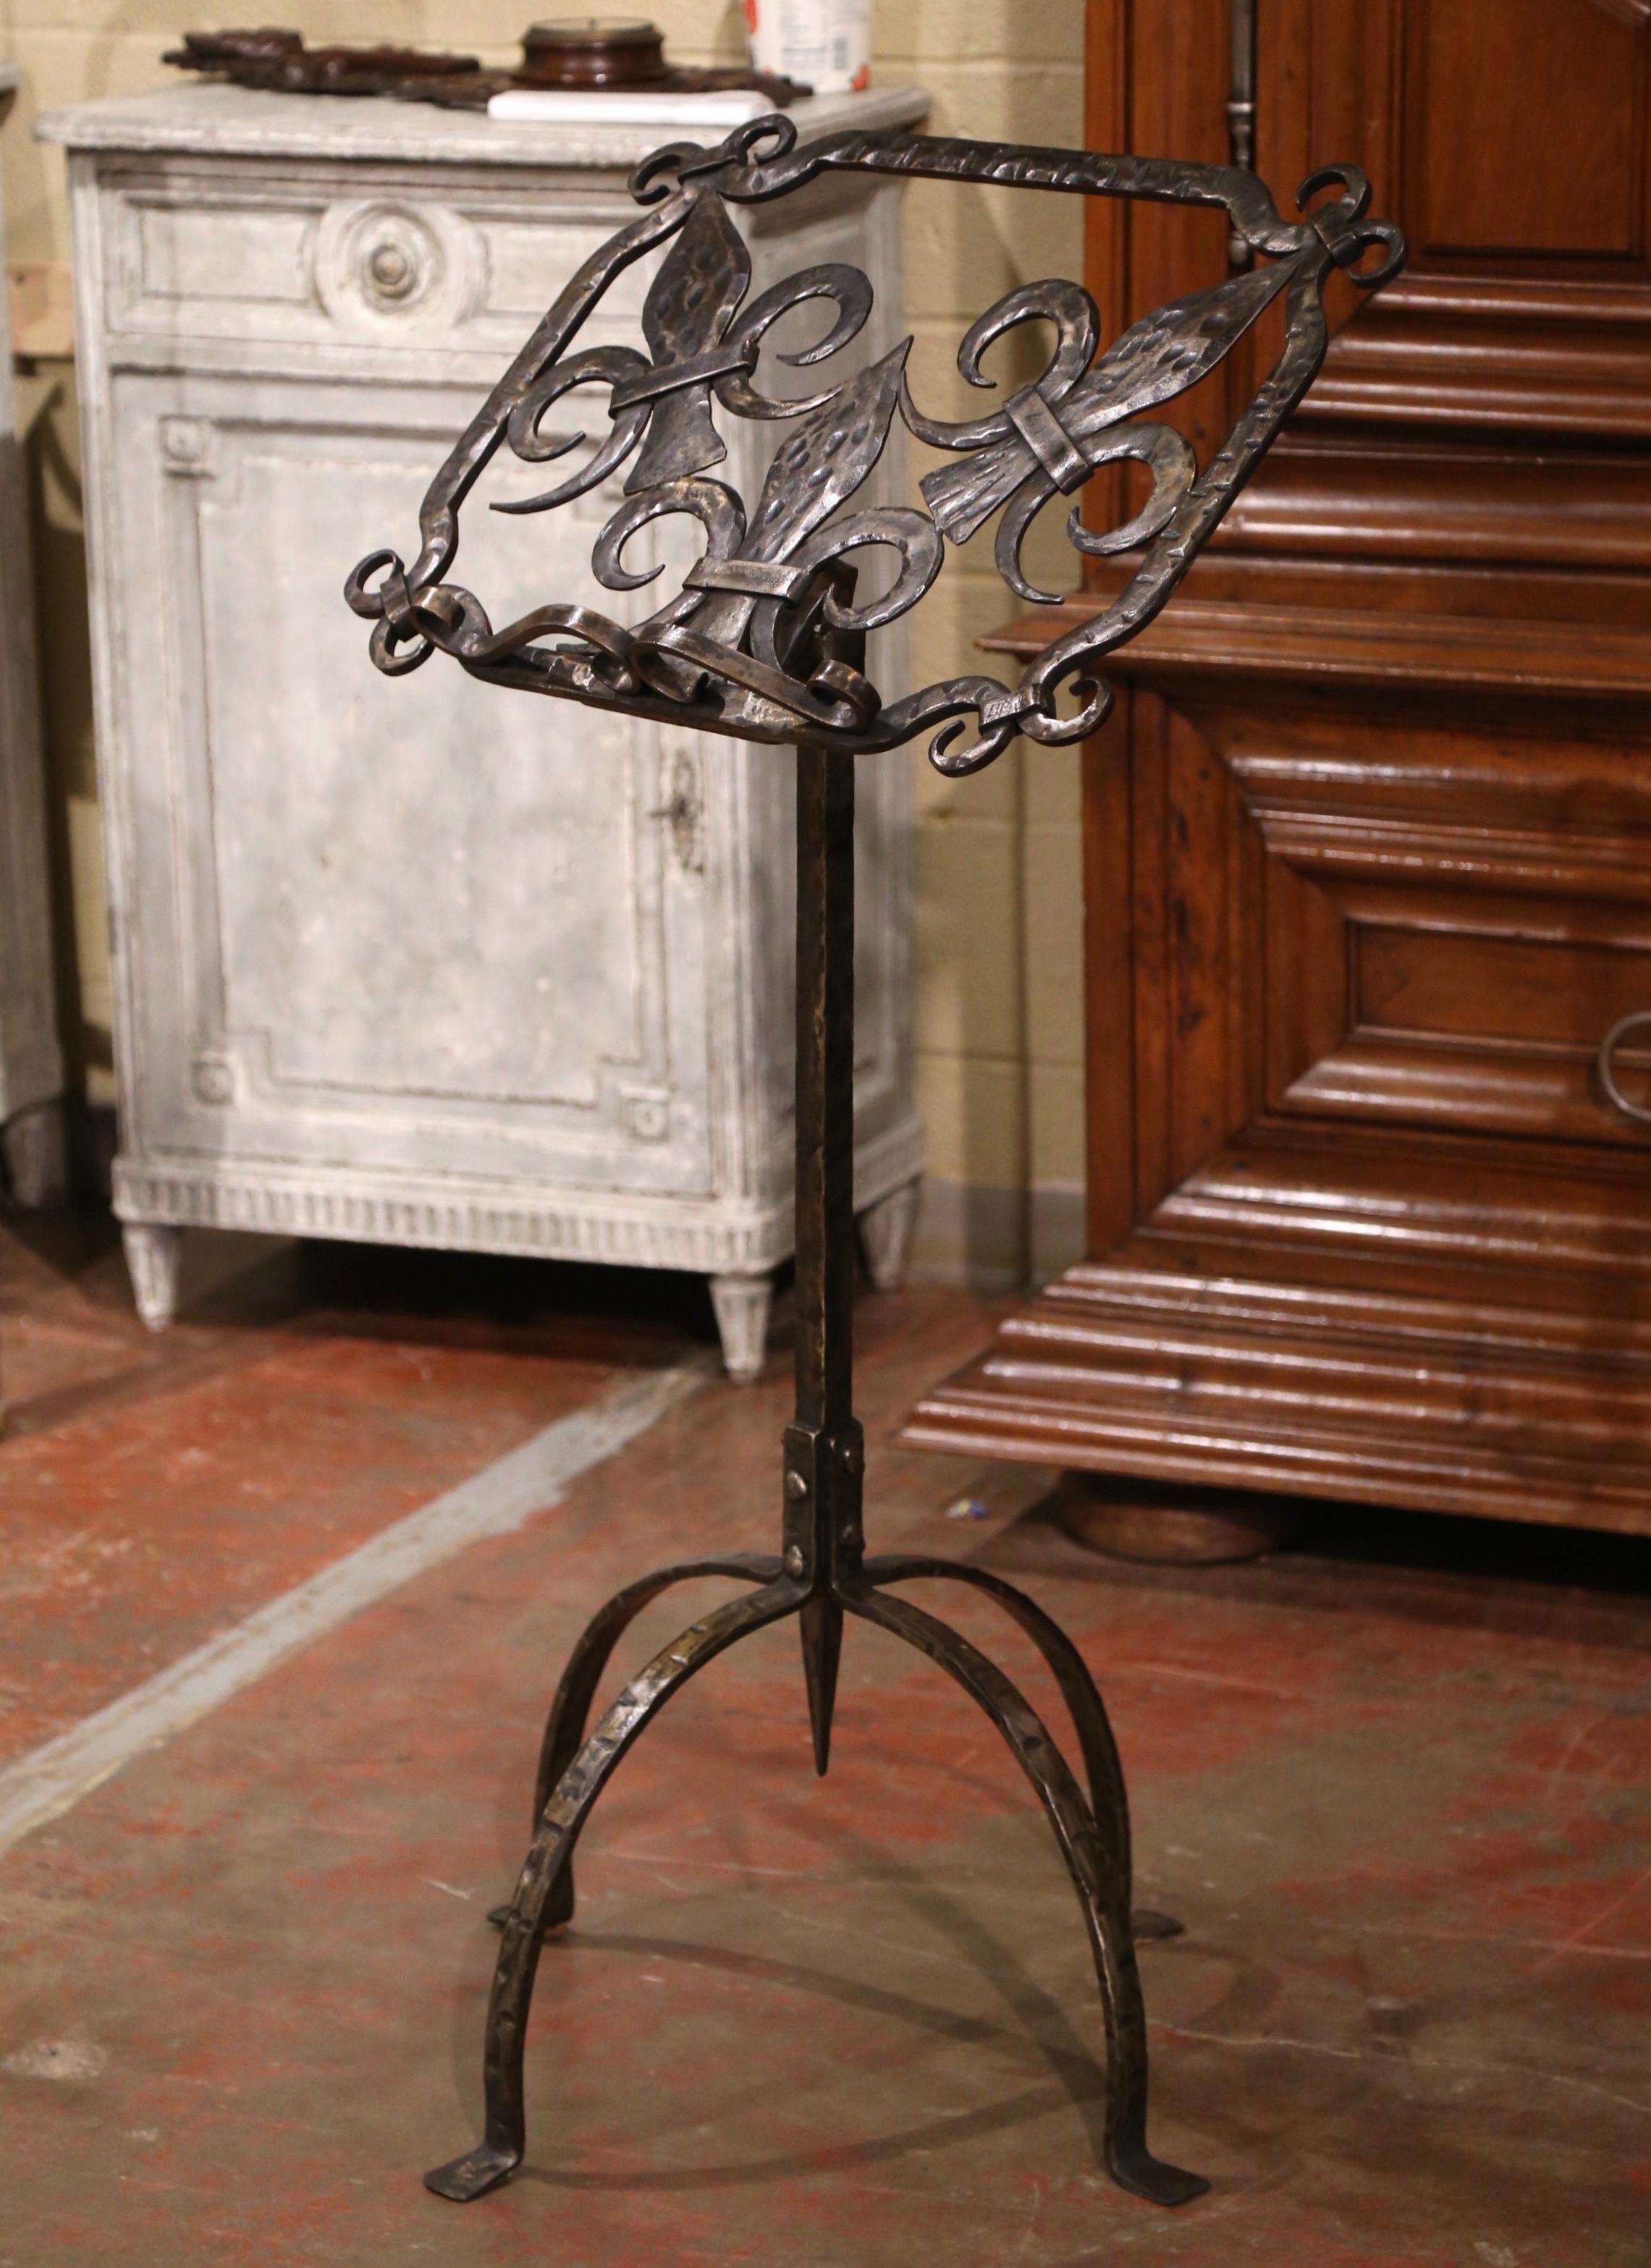  19th Century French Forged Iron Music Stand Lectern with Fleur-de-Lys Decor 3